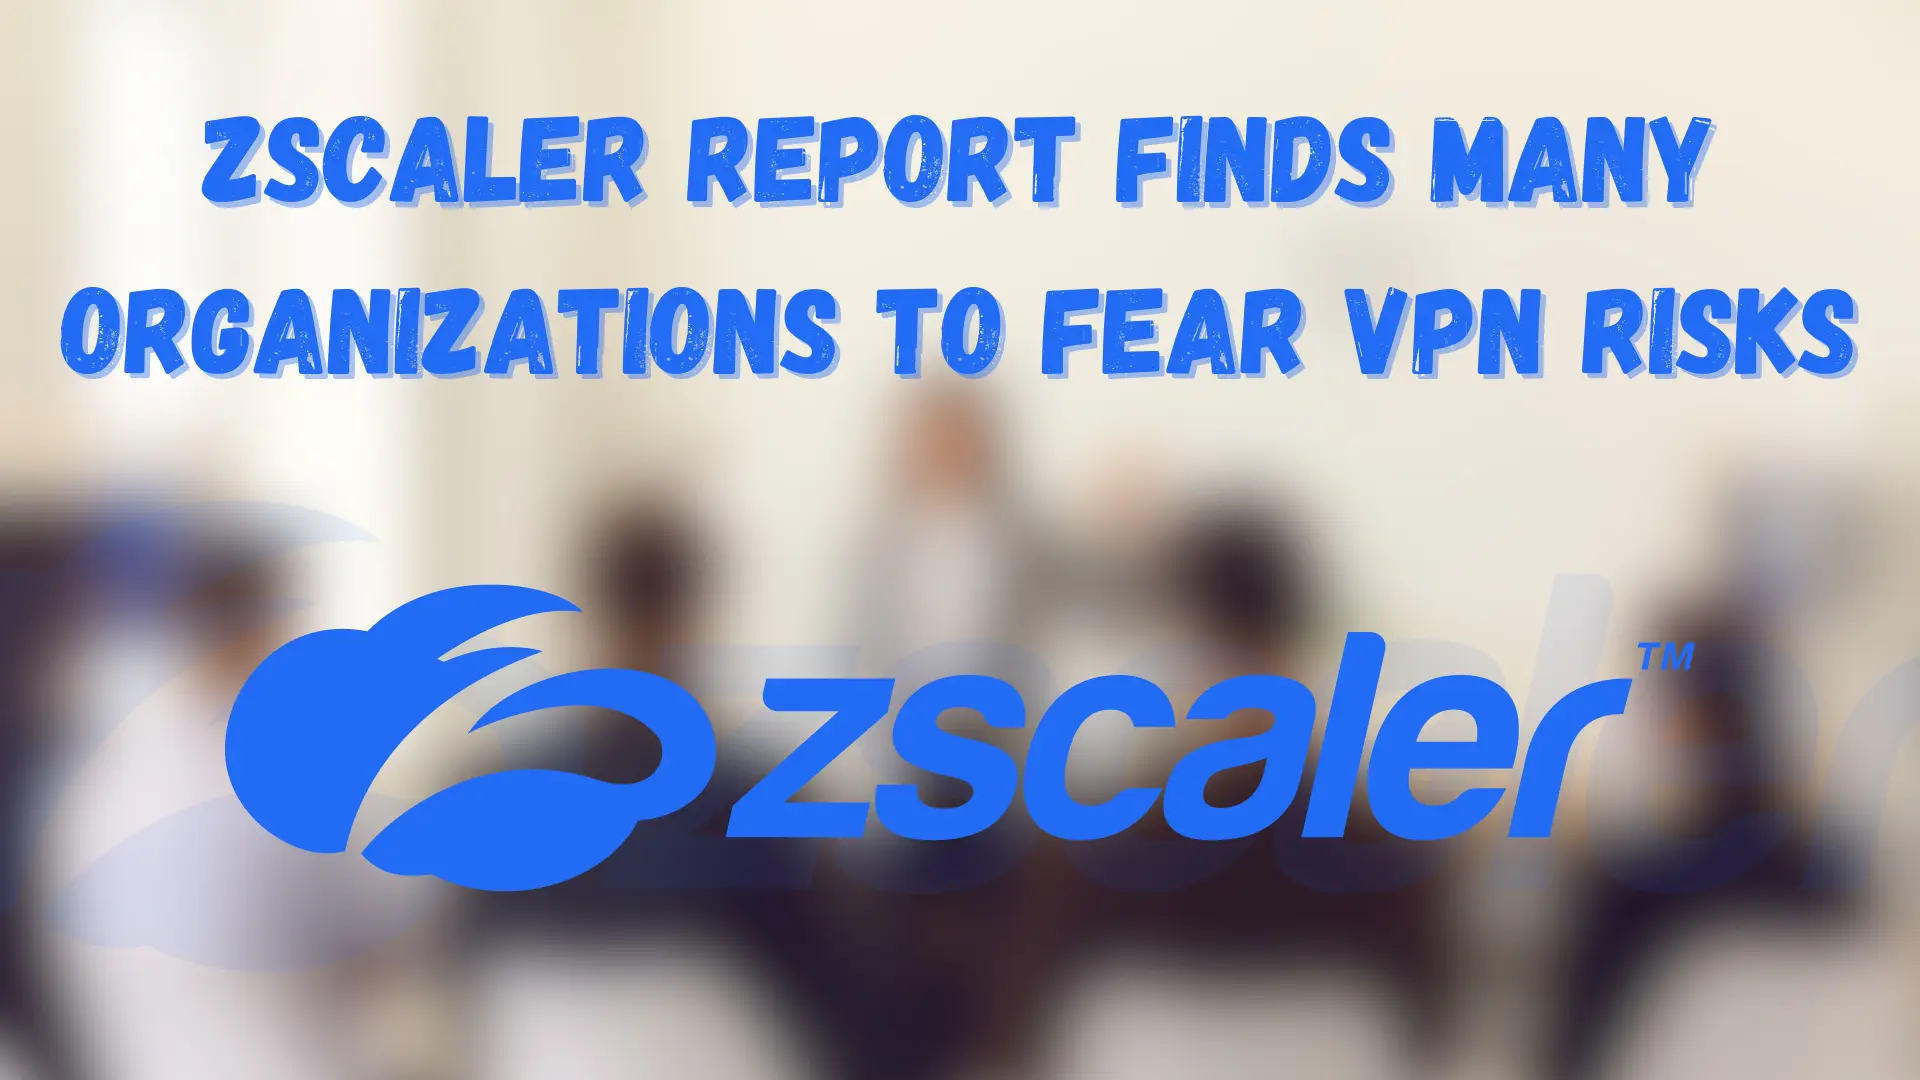 Zscaler Report Suggests Organizations Fear VPN Risks